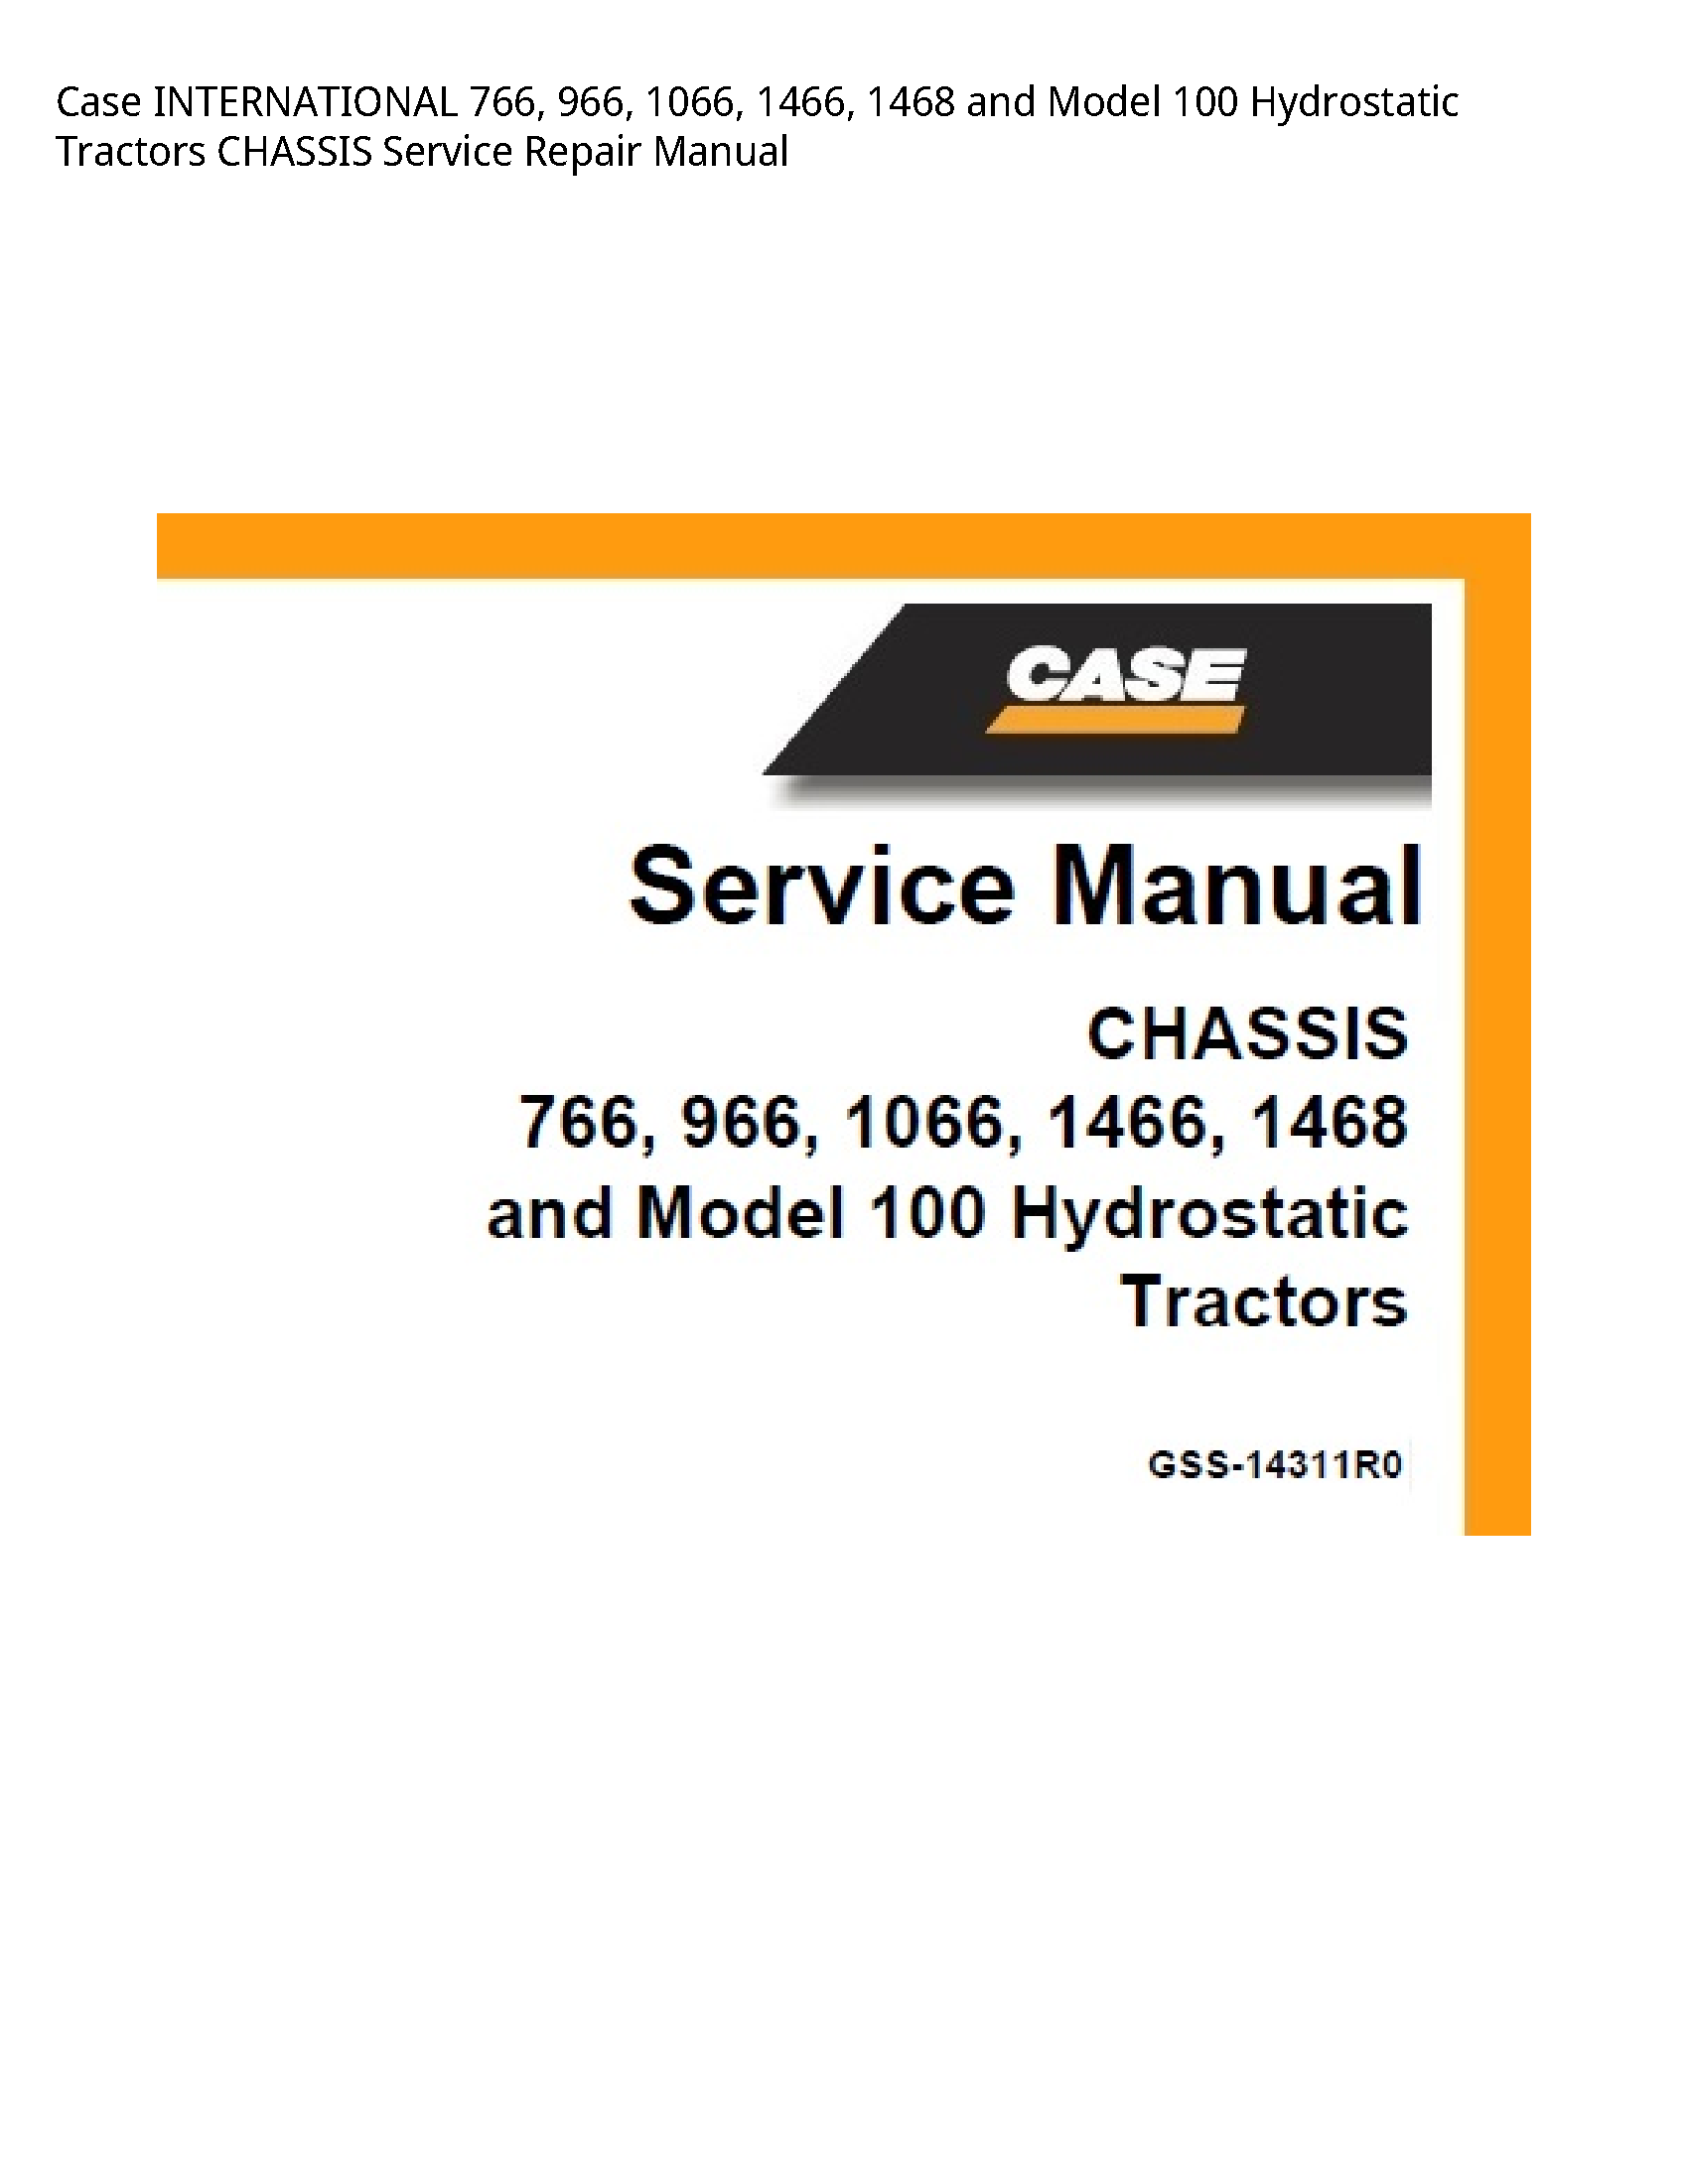 Case/Case IH 766 INTERNATIONAL  Model Hydrostatic Tractors CHASSIS manual